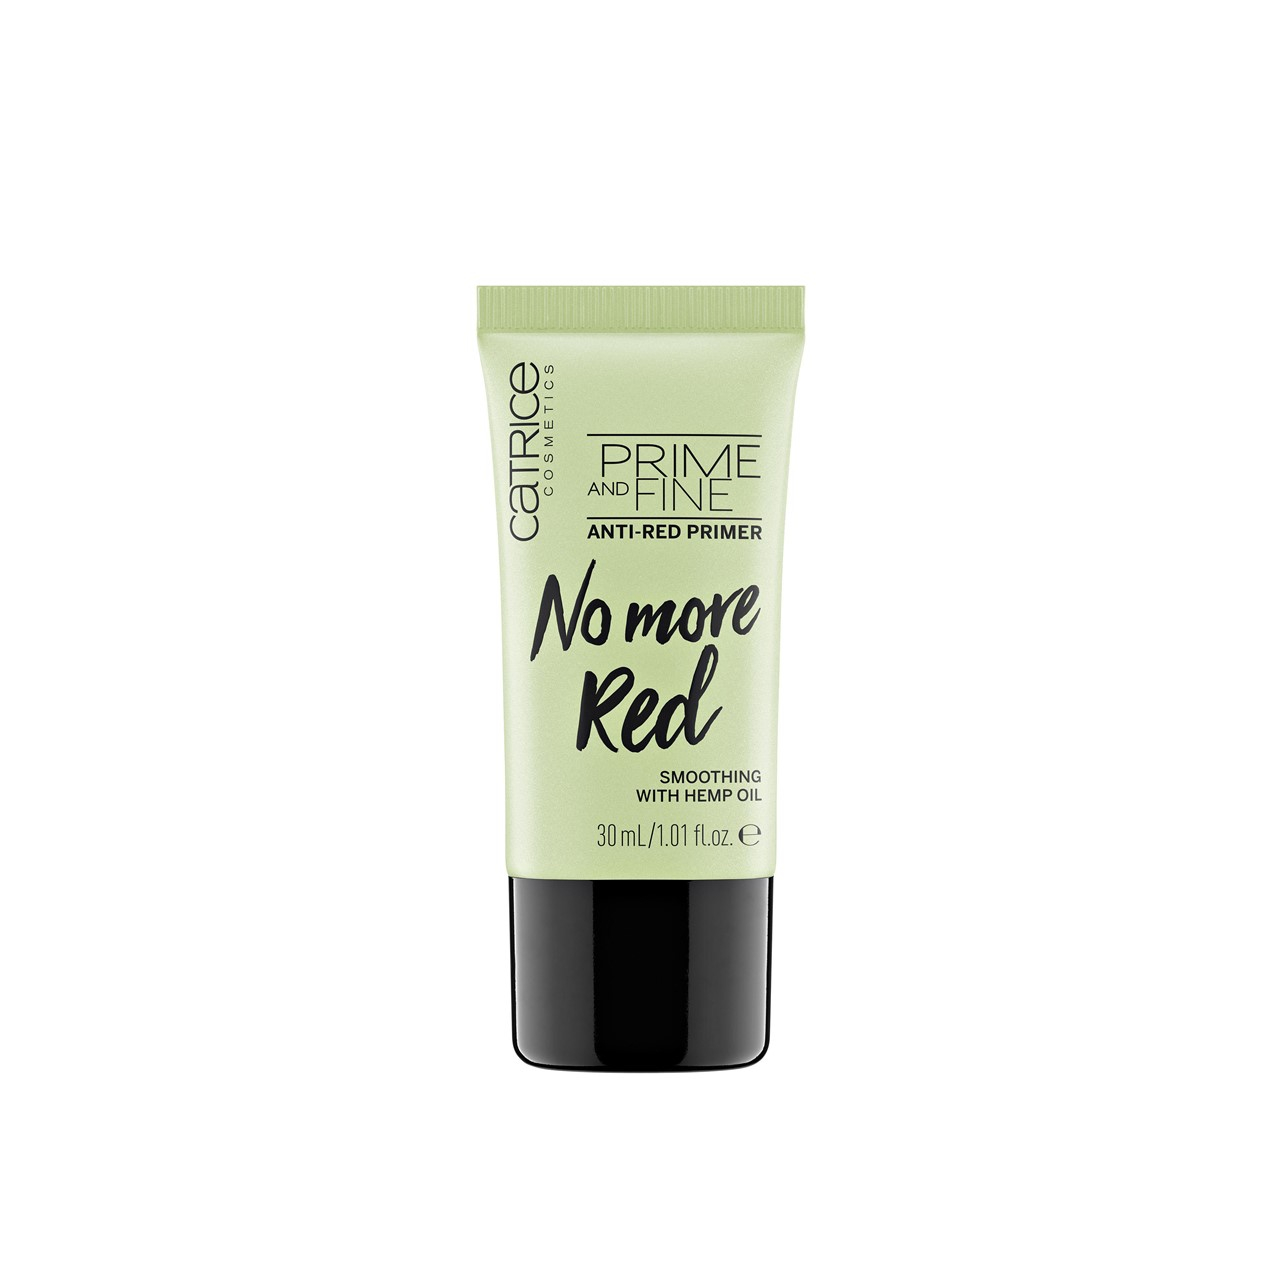 Buy Catrice Prime And Fine 30ml More Primer Red · No Anti-Red Greenland